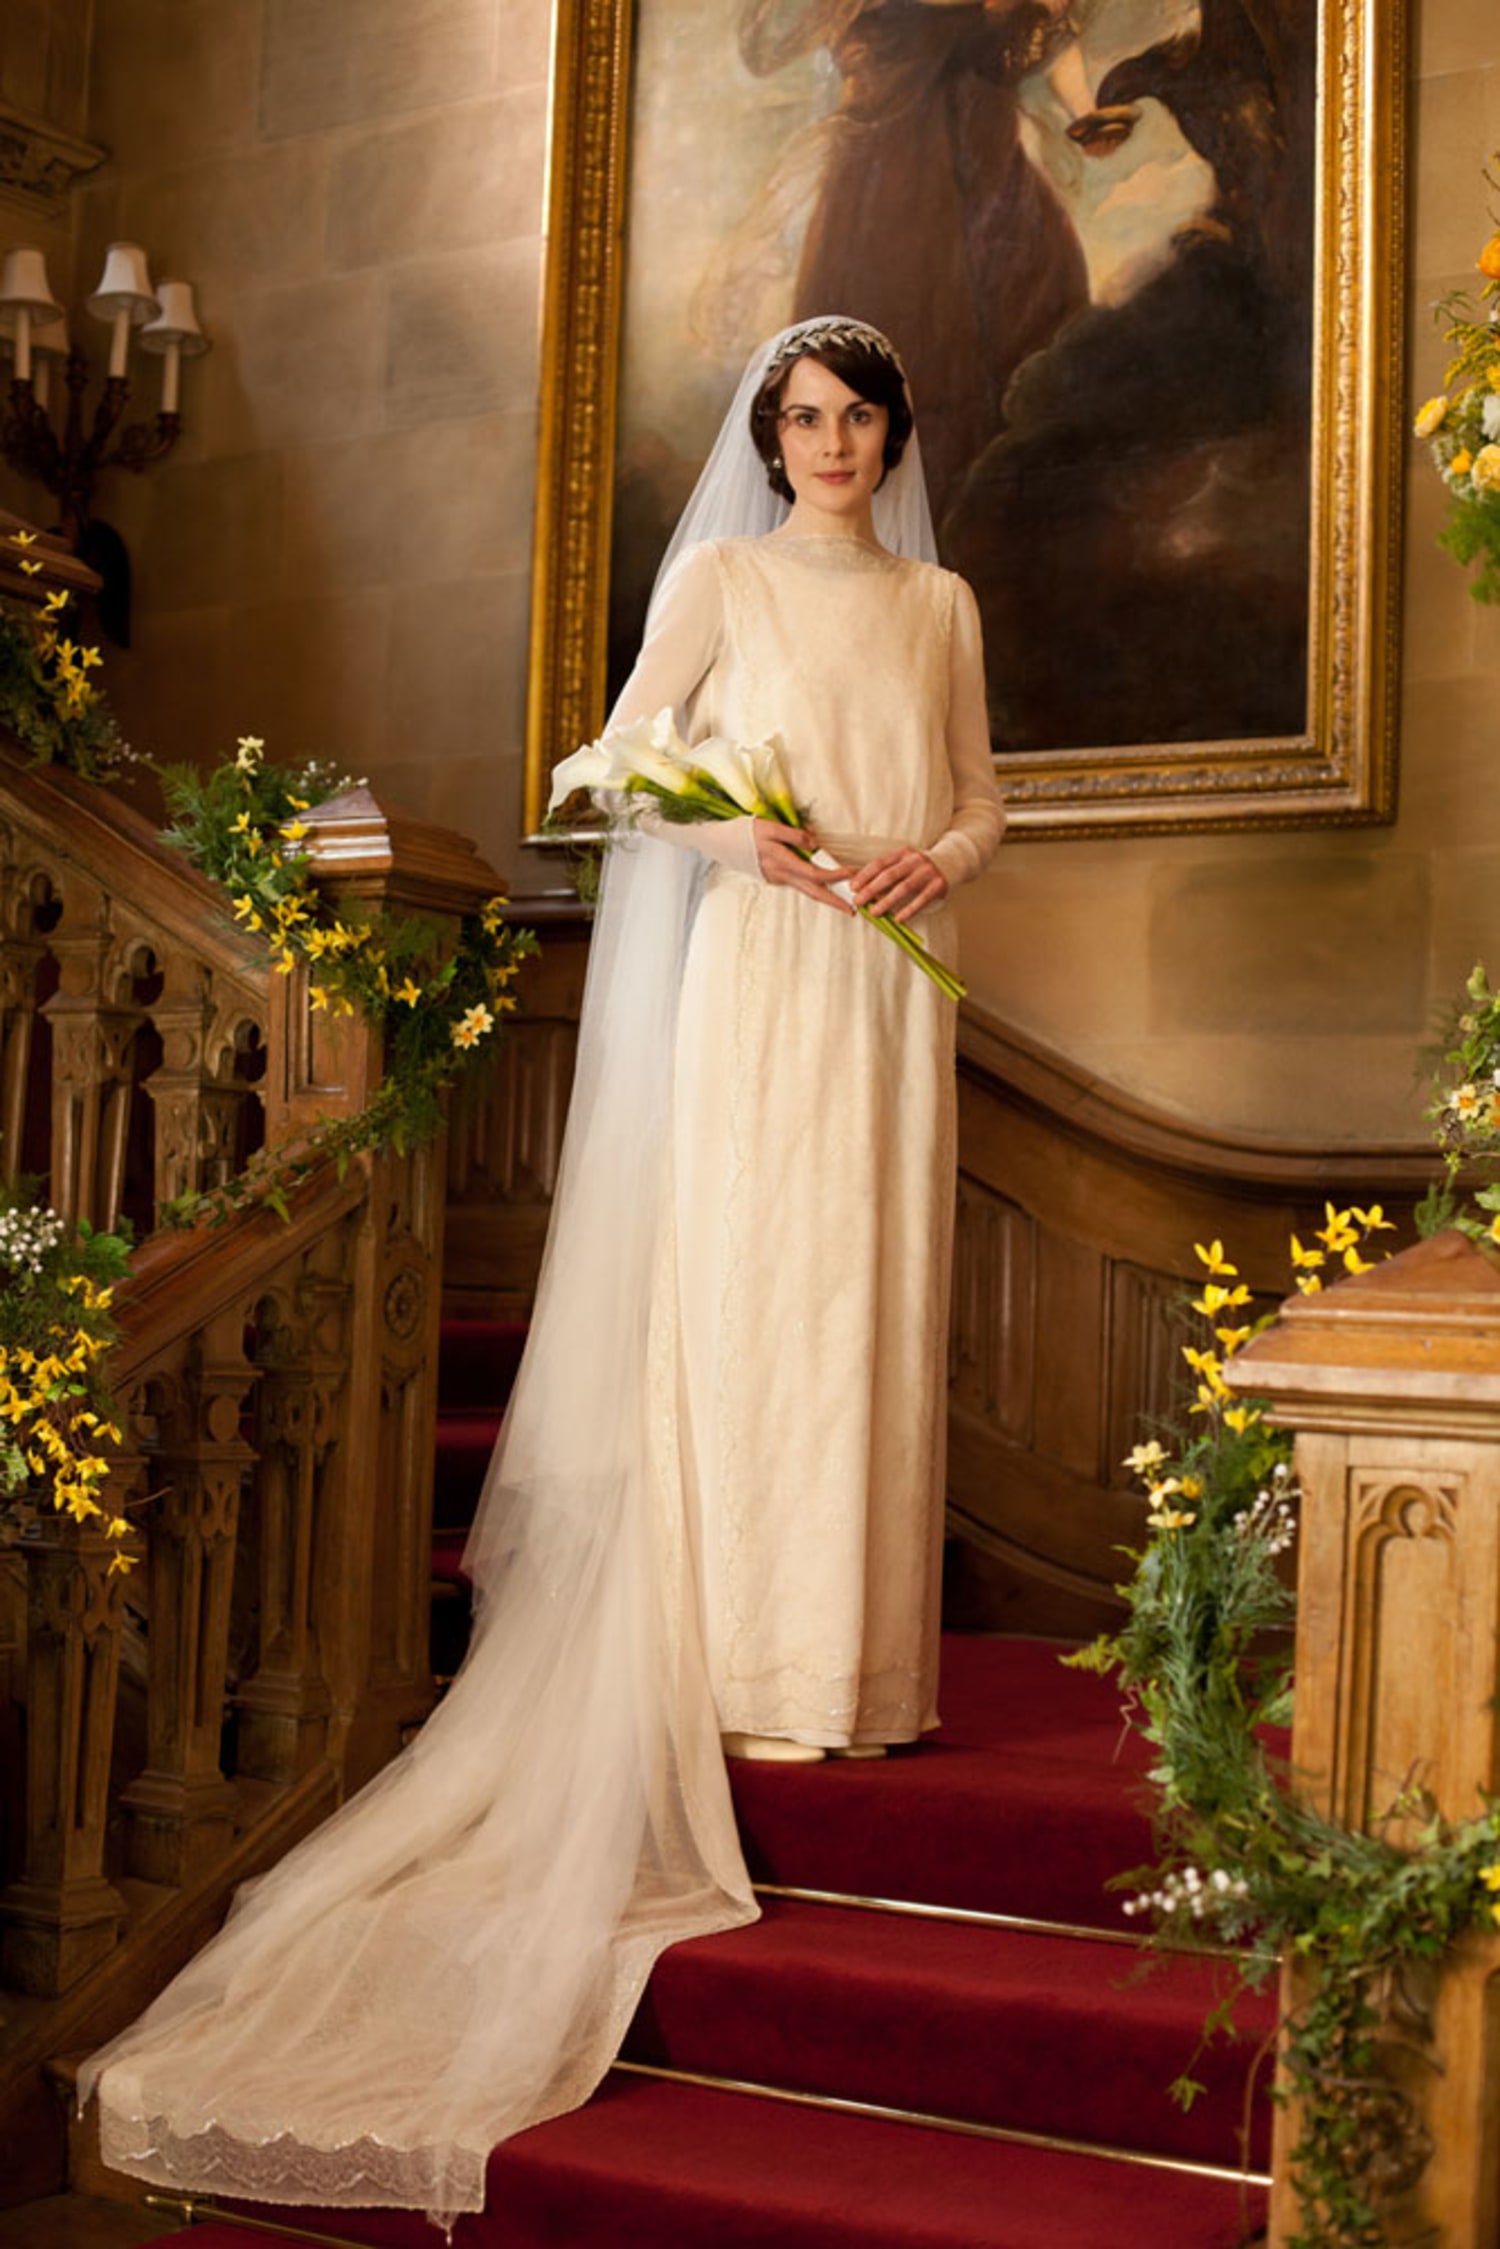 Michelle Dockery as Lady Mary Talbot, Downton Abbey Movie